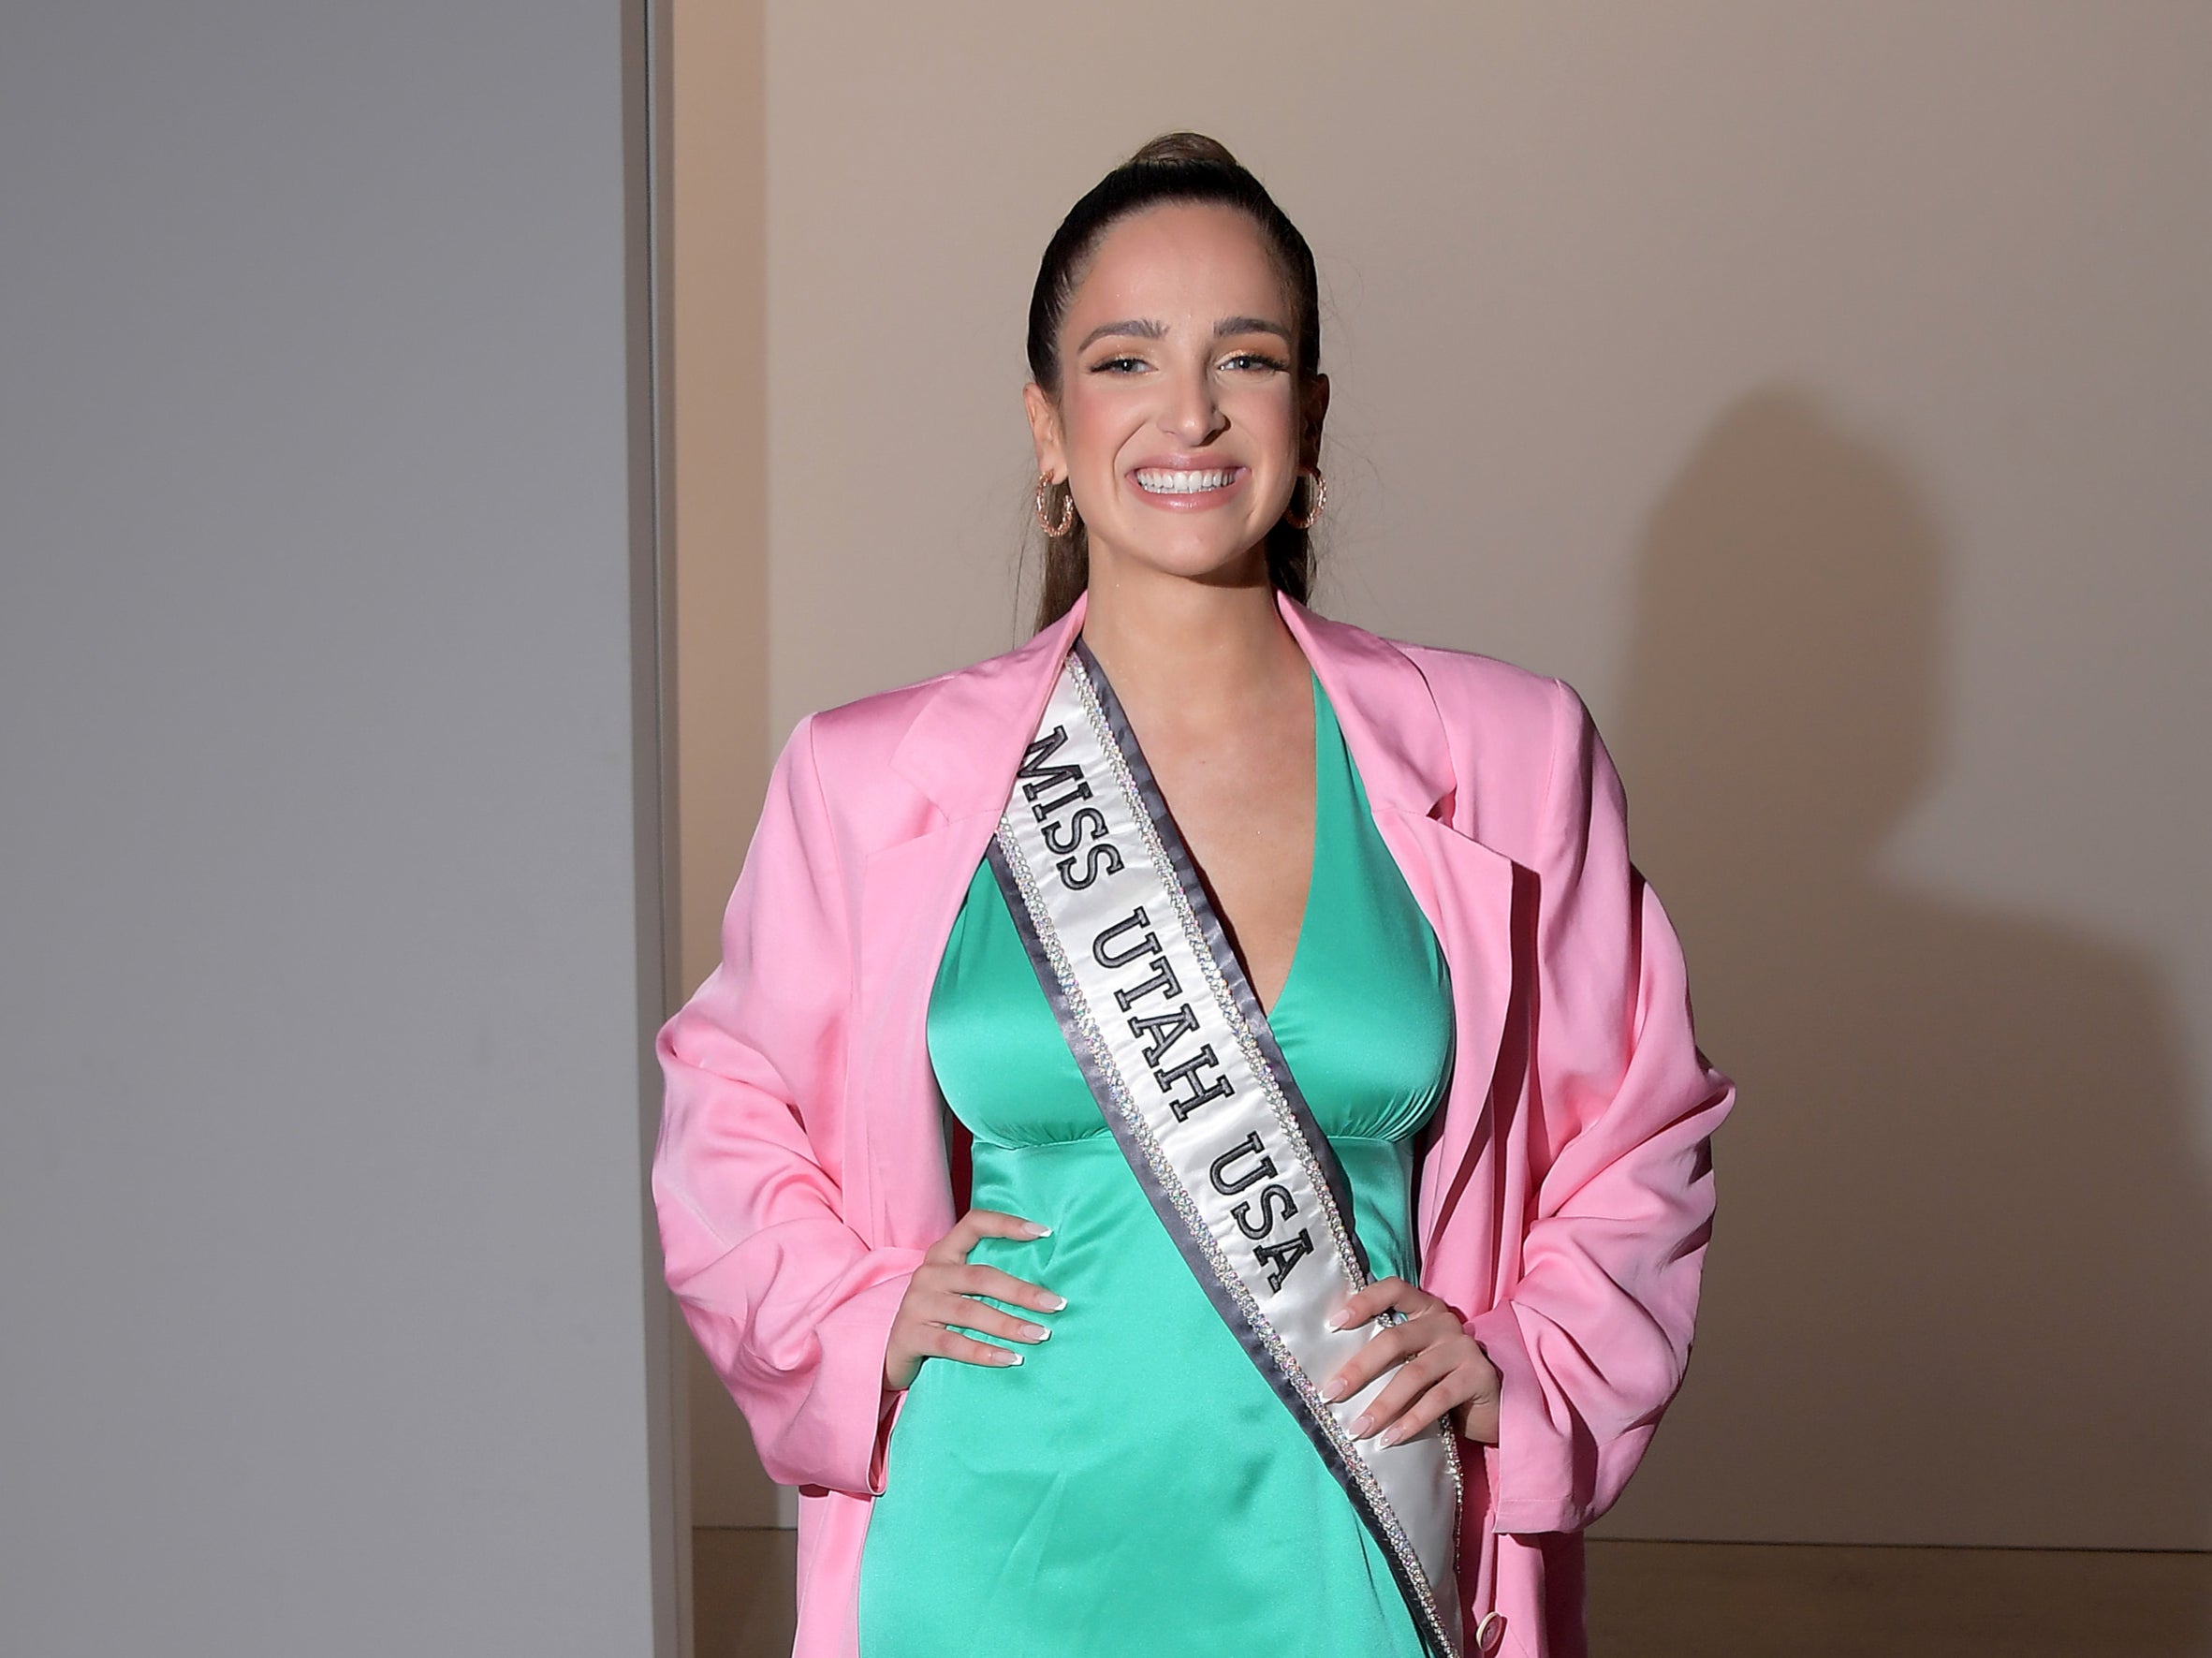 Rachel Slawson is the first openly bisexual to compete in the Miss USA competition